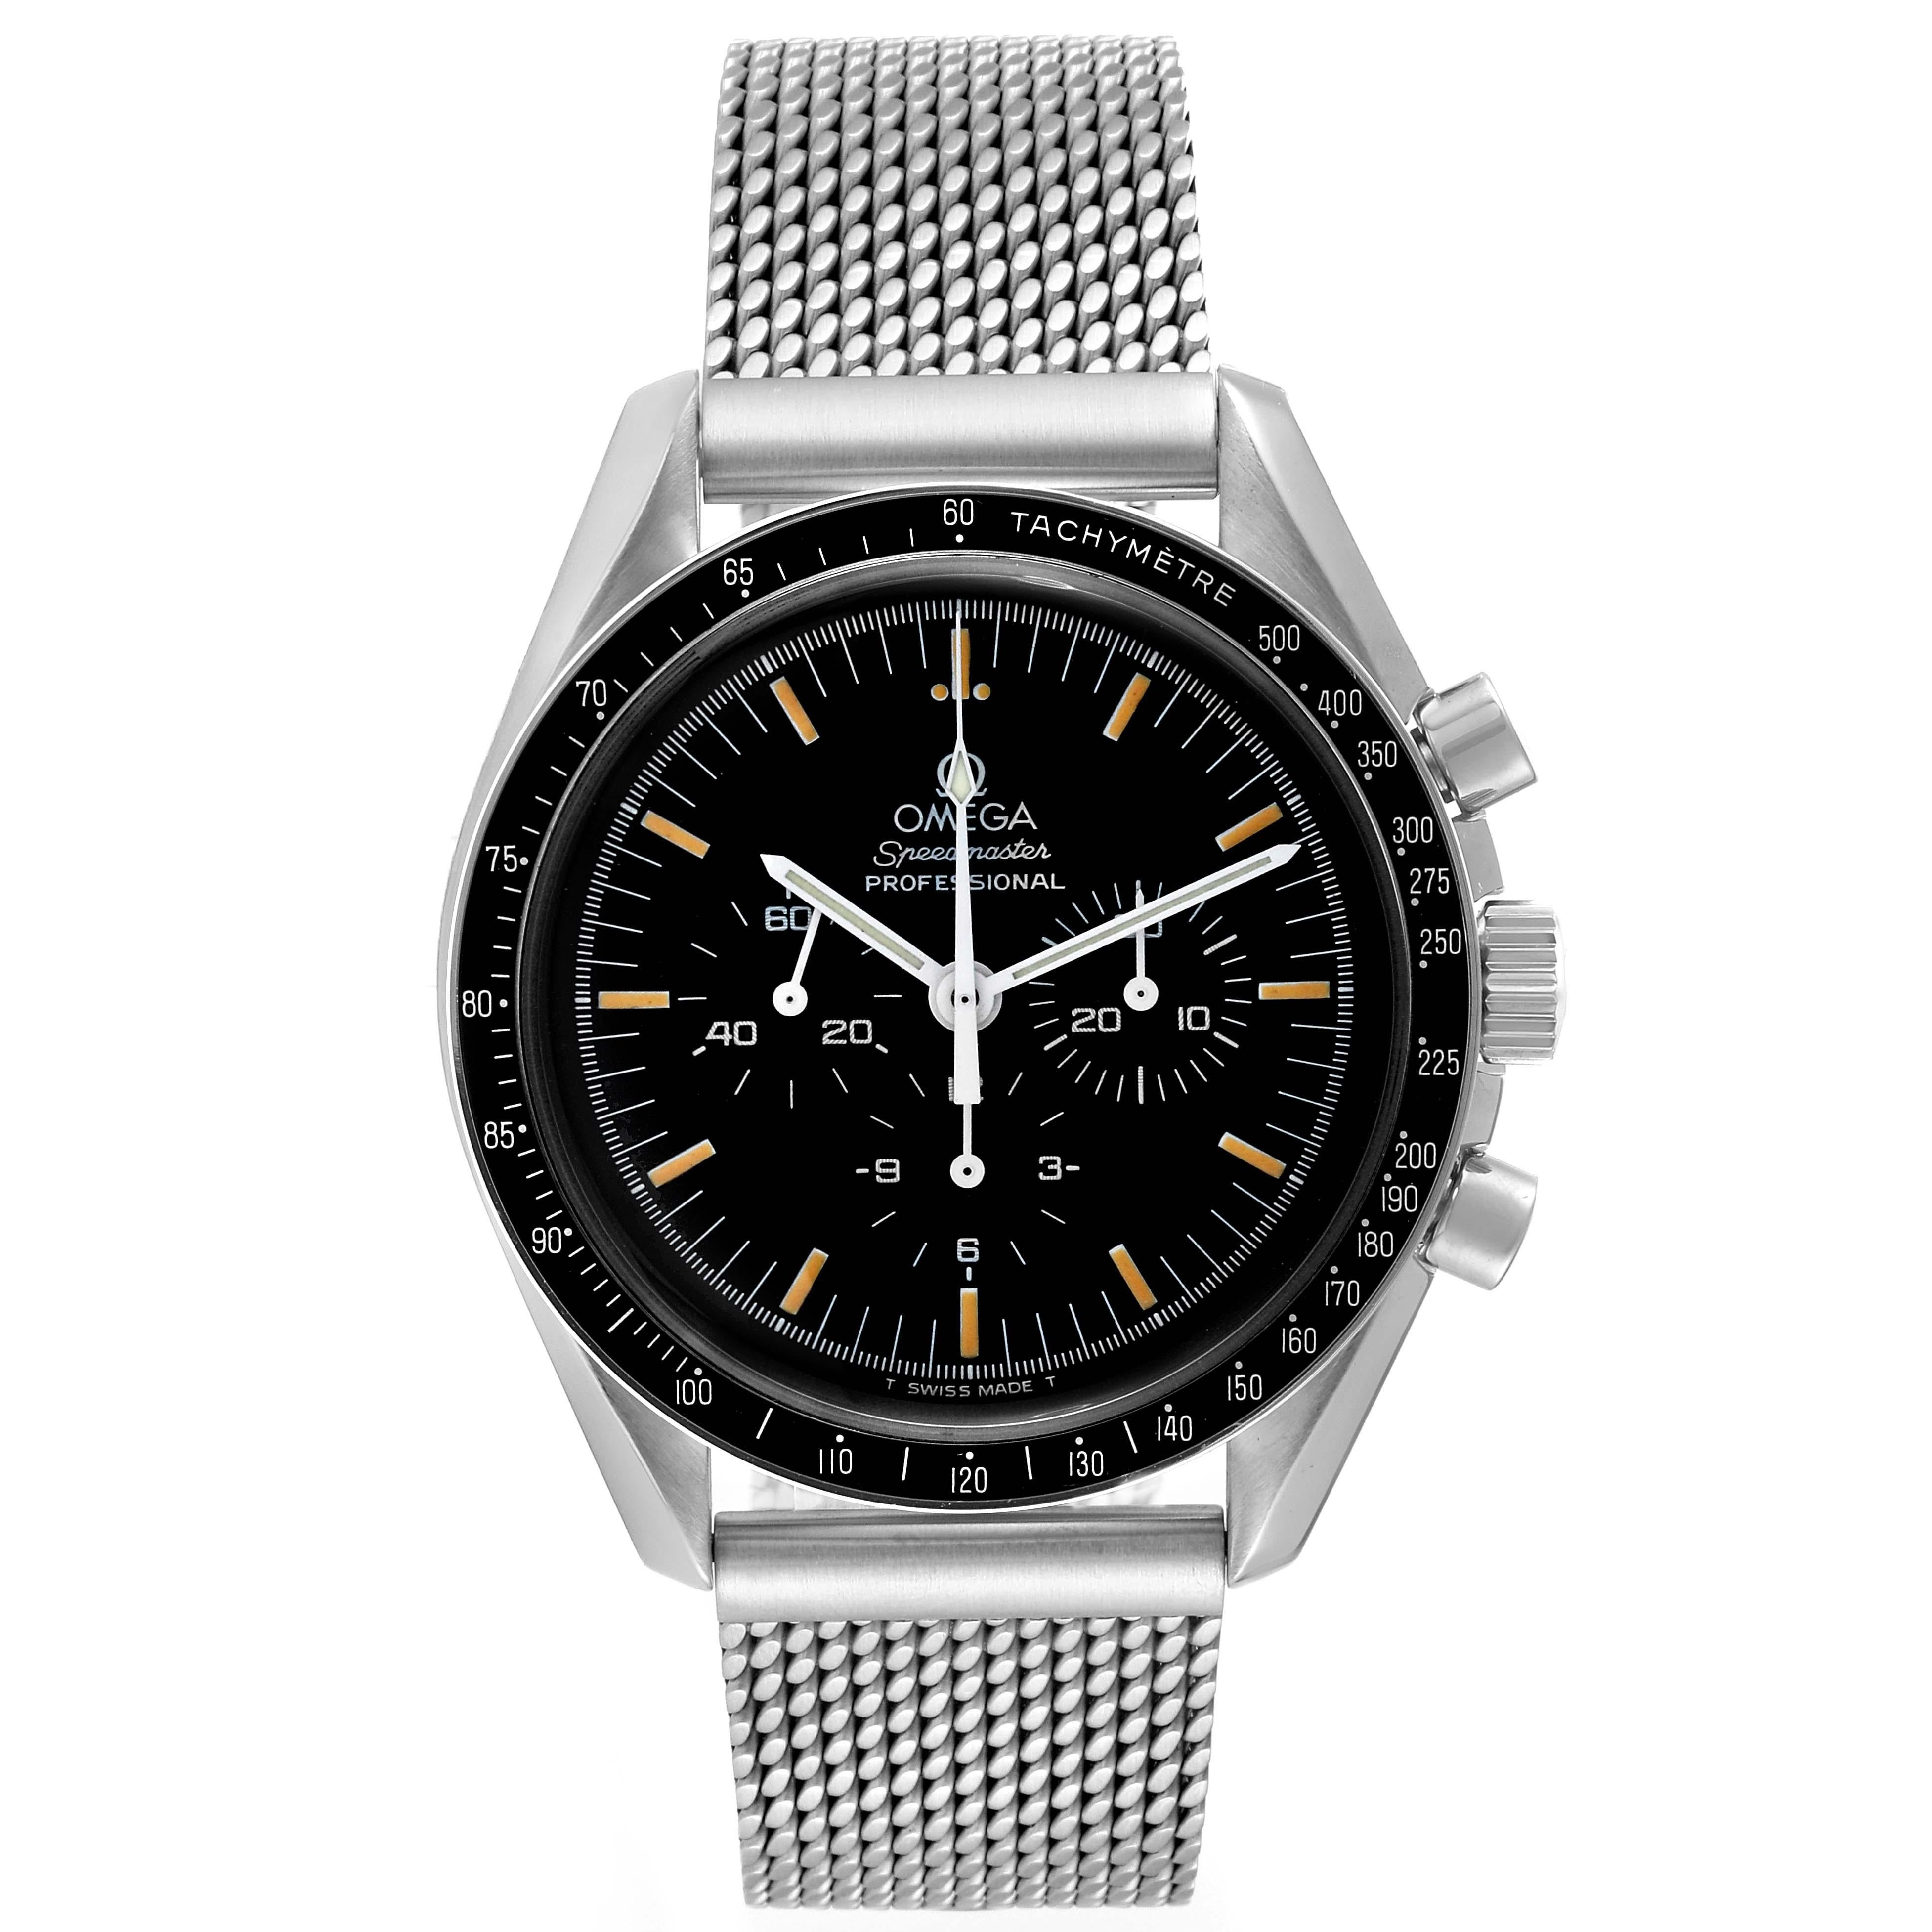 Omega Speedmaster MoonWatch Chronograph Black Dial Steel Mens Watch 3570.50.00. Manual winding chronograph movement. Stainless steel round case 42.0 mm in diameter. Stainless steel bezel with tachymetre function. Hesalite acrylic crystal. Black dial